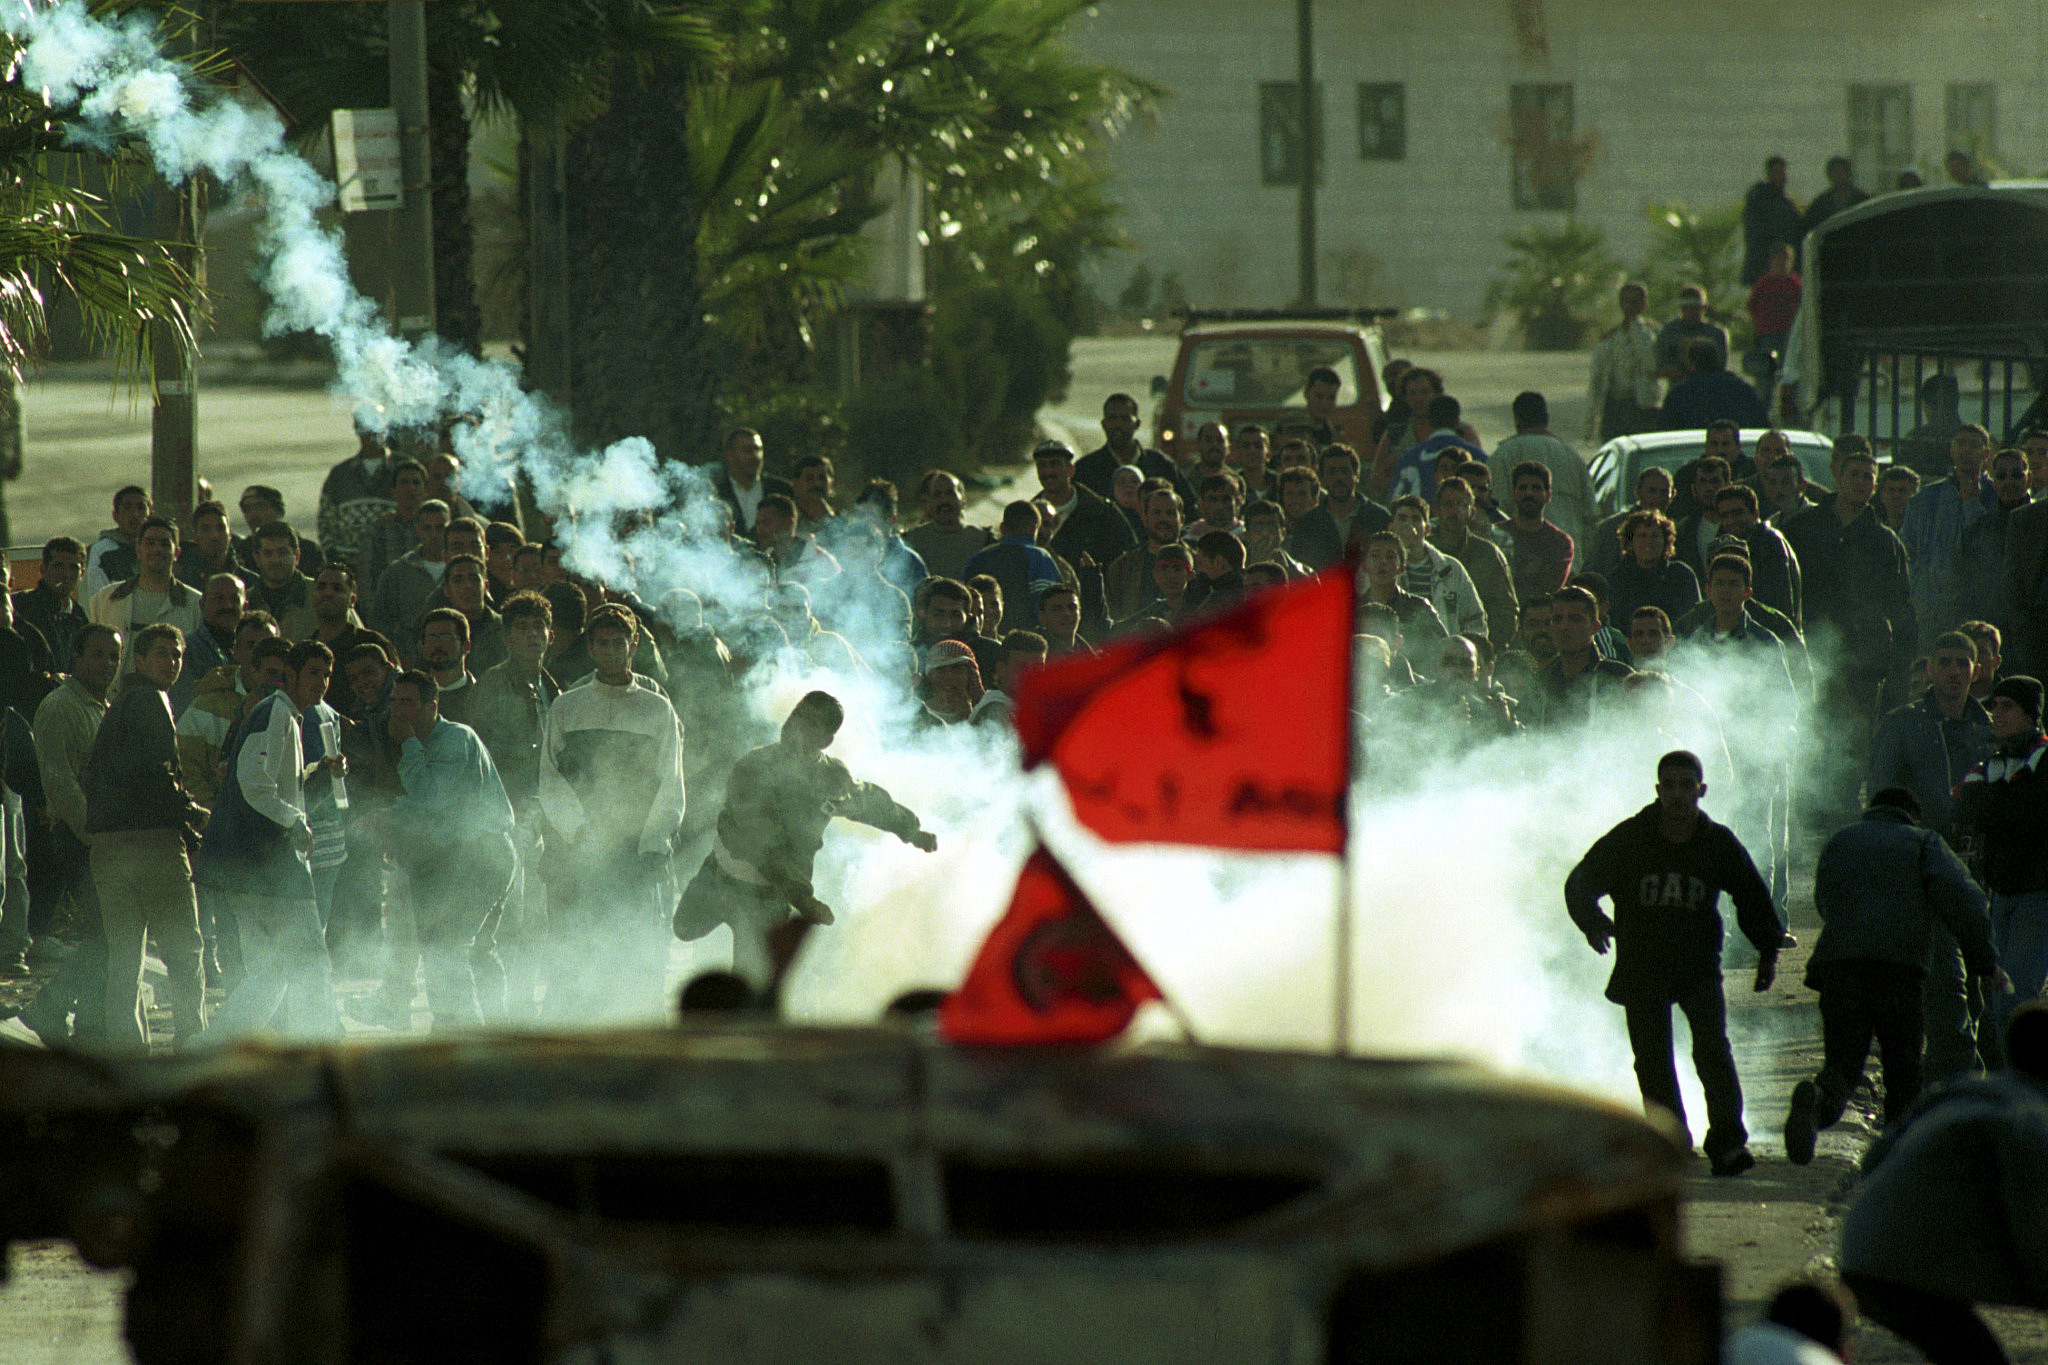 Palestinians throw back tear gas at the Israeli army in Ramallah during the first days of the Second Intifada, October 24, 2000. (Nati Shohat/Flash90)